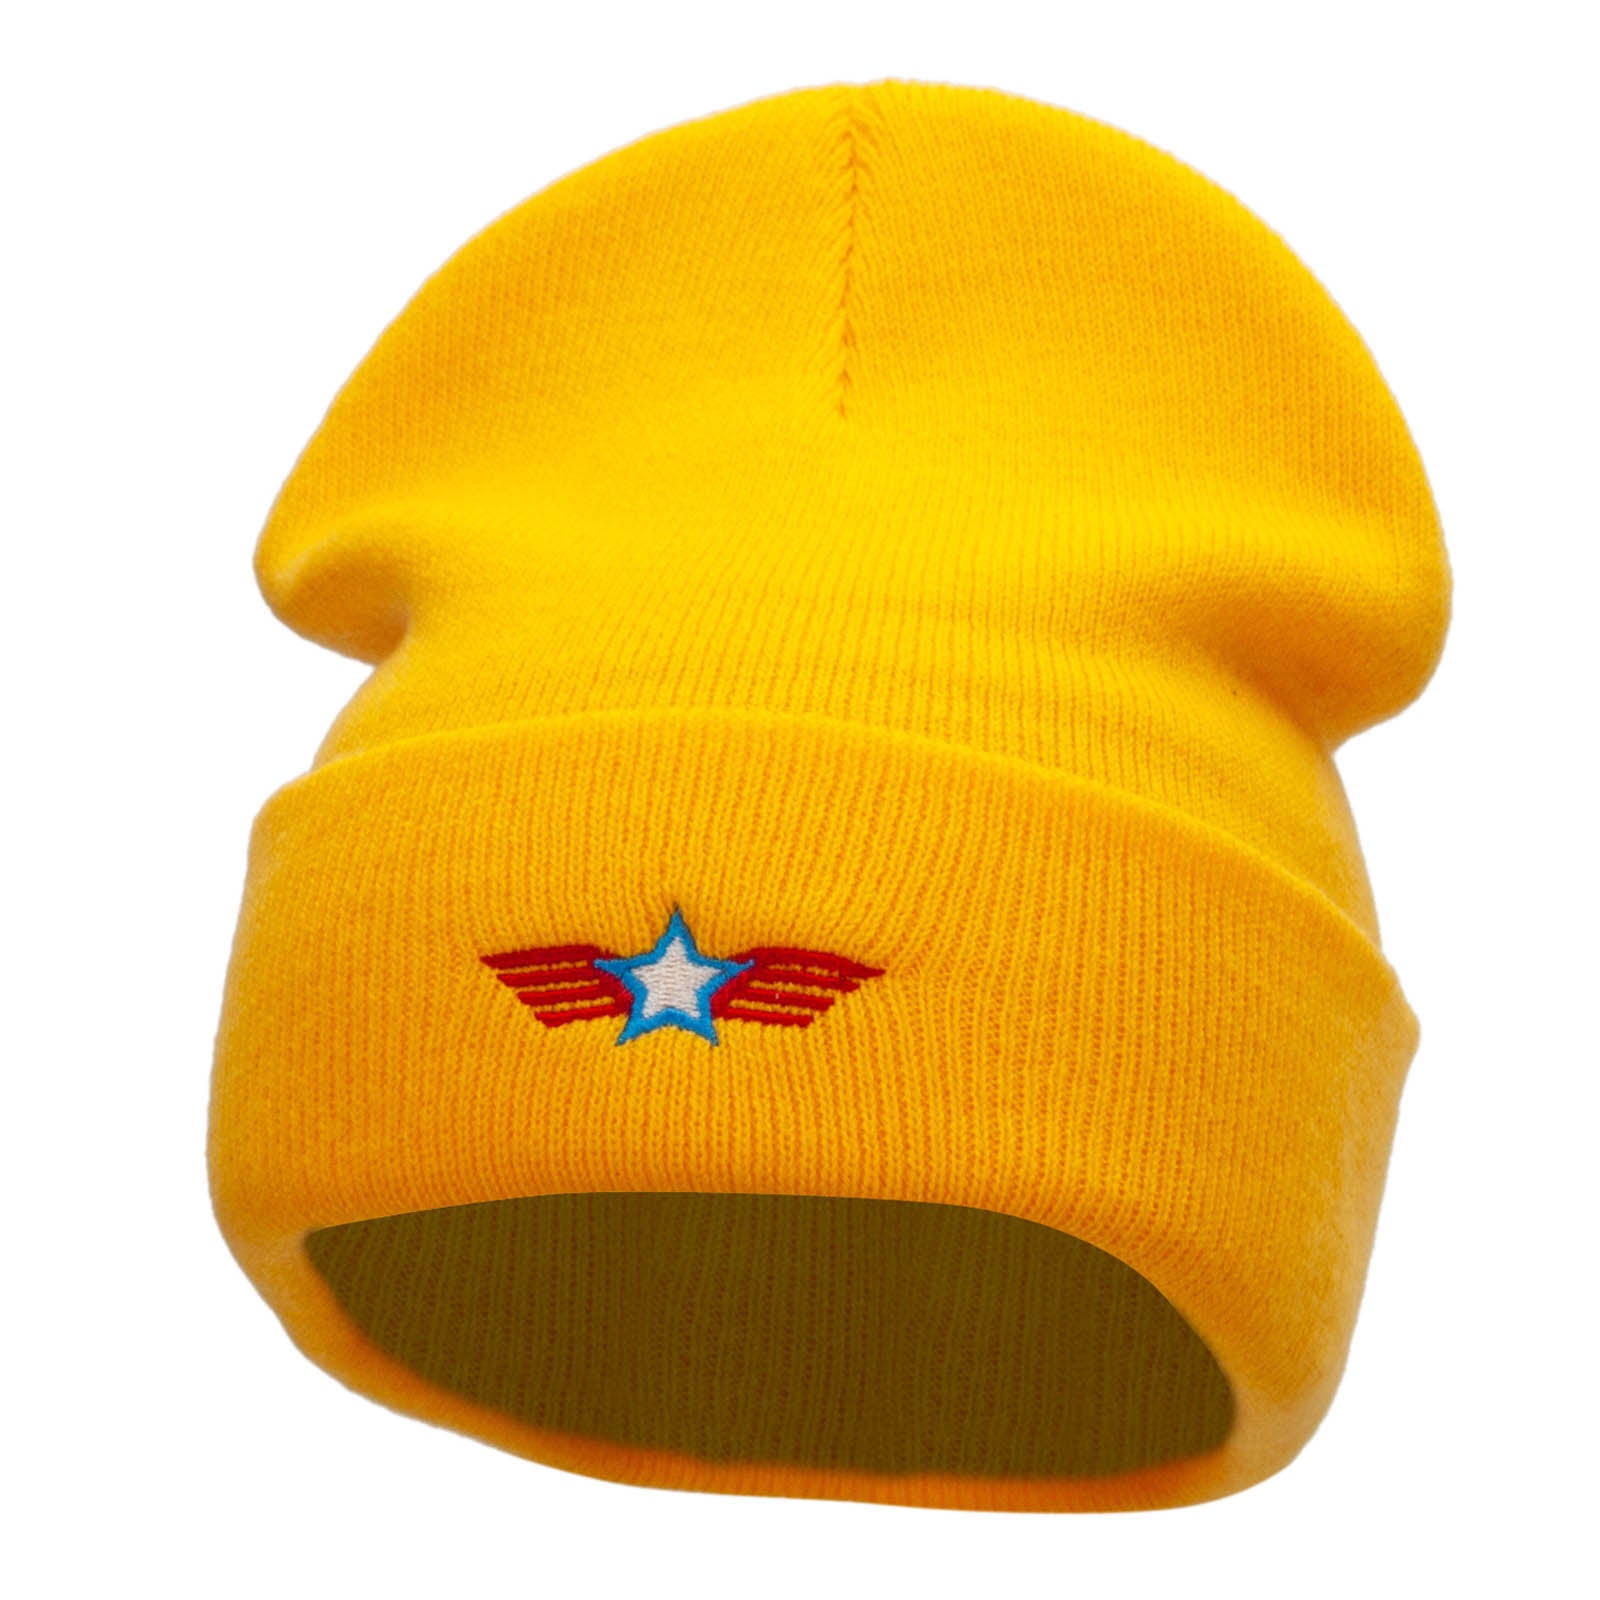 Winged Star Embroidered 12 Inch Long Knitted Beanie - Yellow OSFM